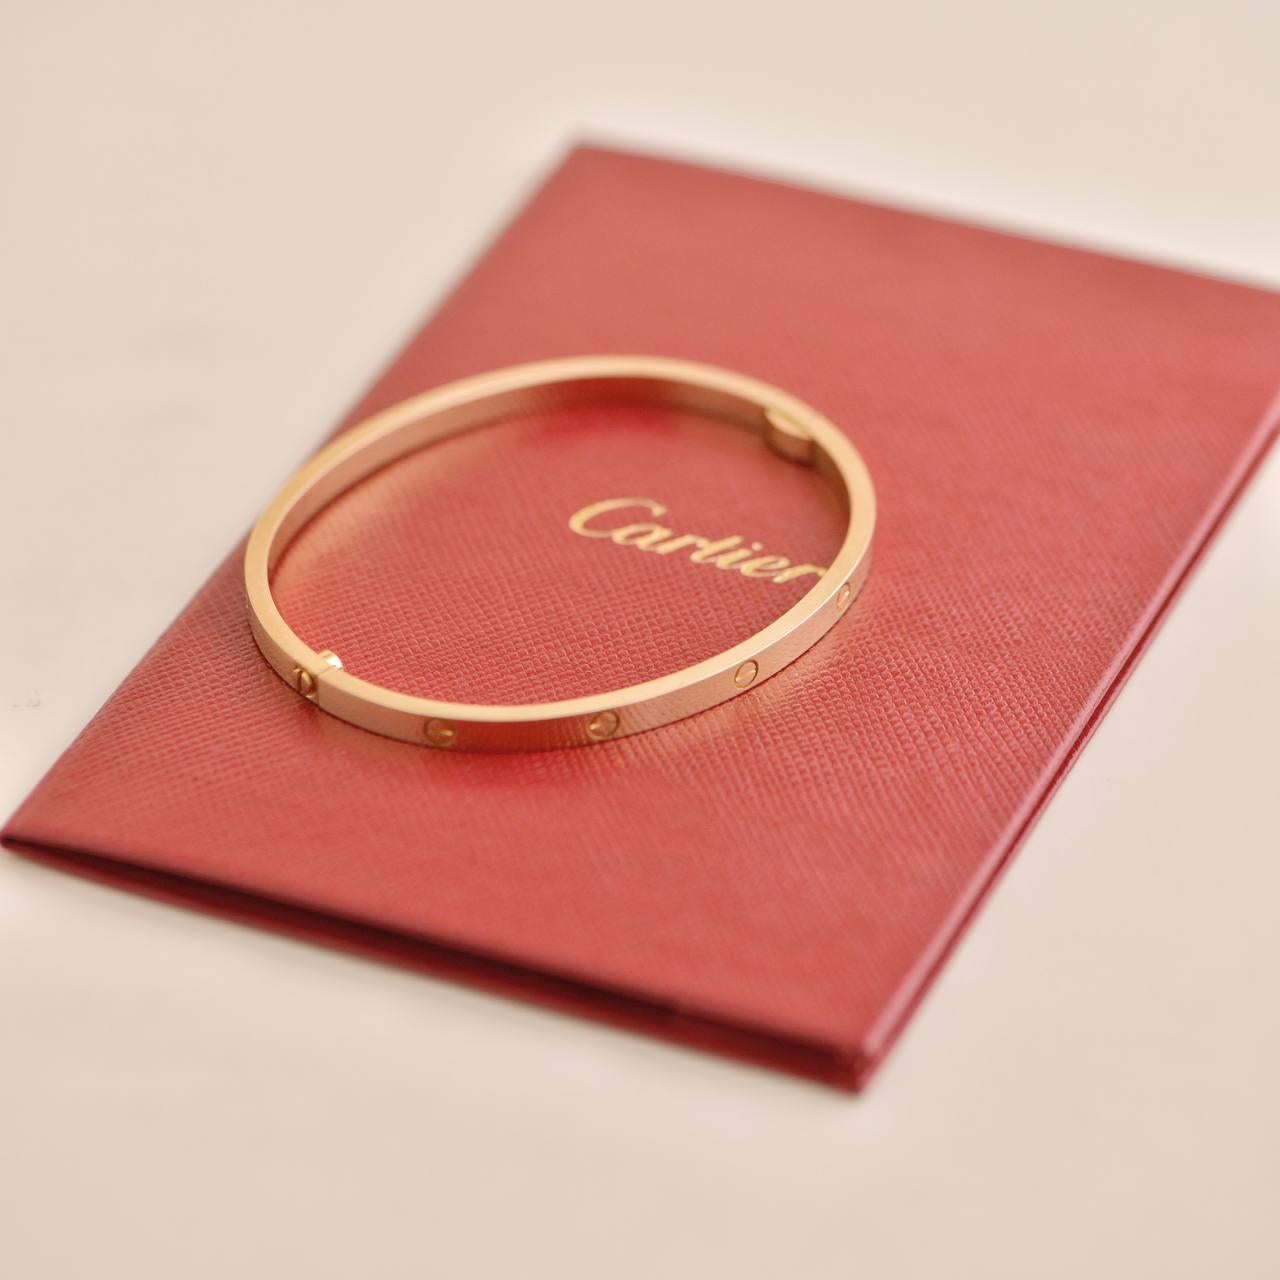 Cartier Love Bracelet Small Model 18K Yellow Gold Size 17 In Excellent Condition For Sale In Banbury, GB